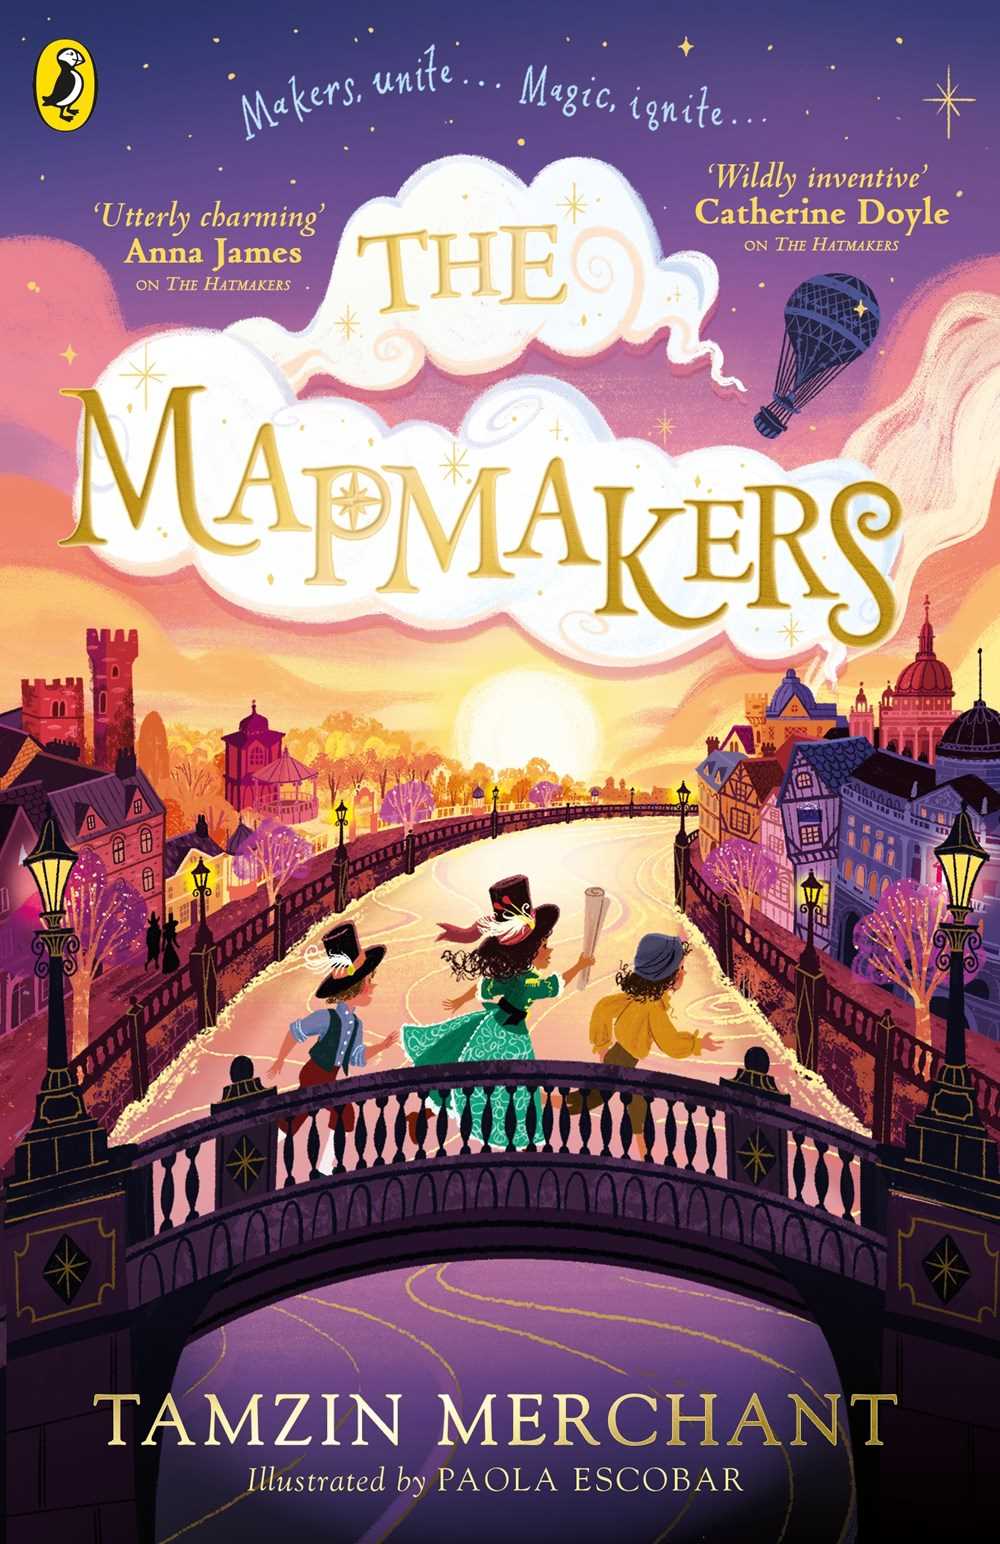 The Hatmakers #02: The Mapmakers